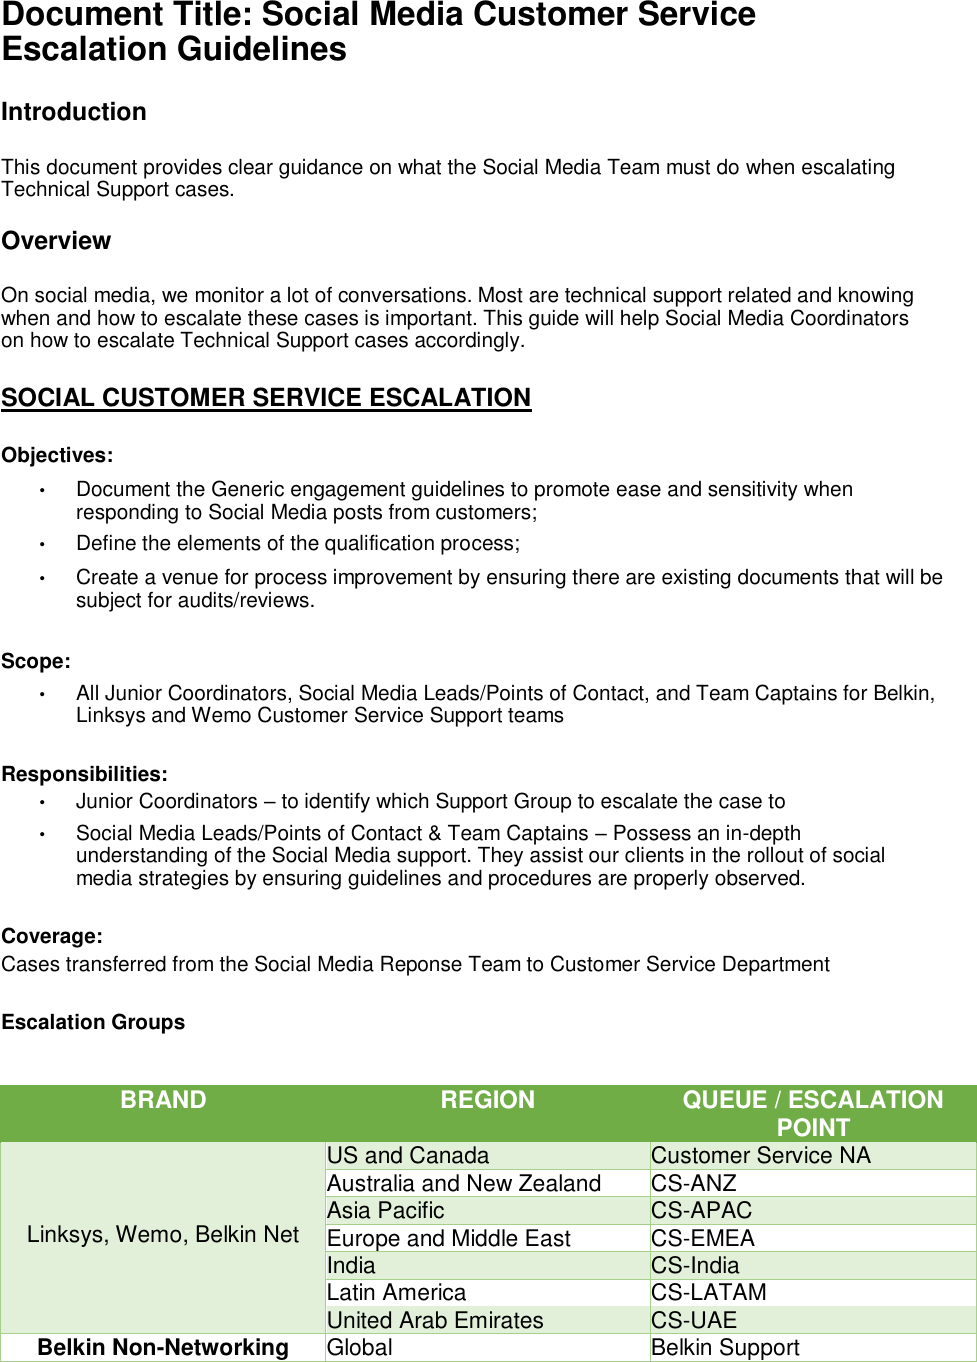 Page 2 of 8 - 5. Social Media To Customer Service Escalation